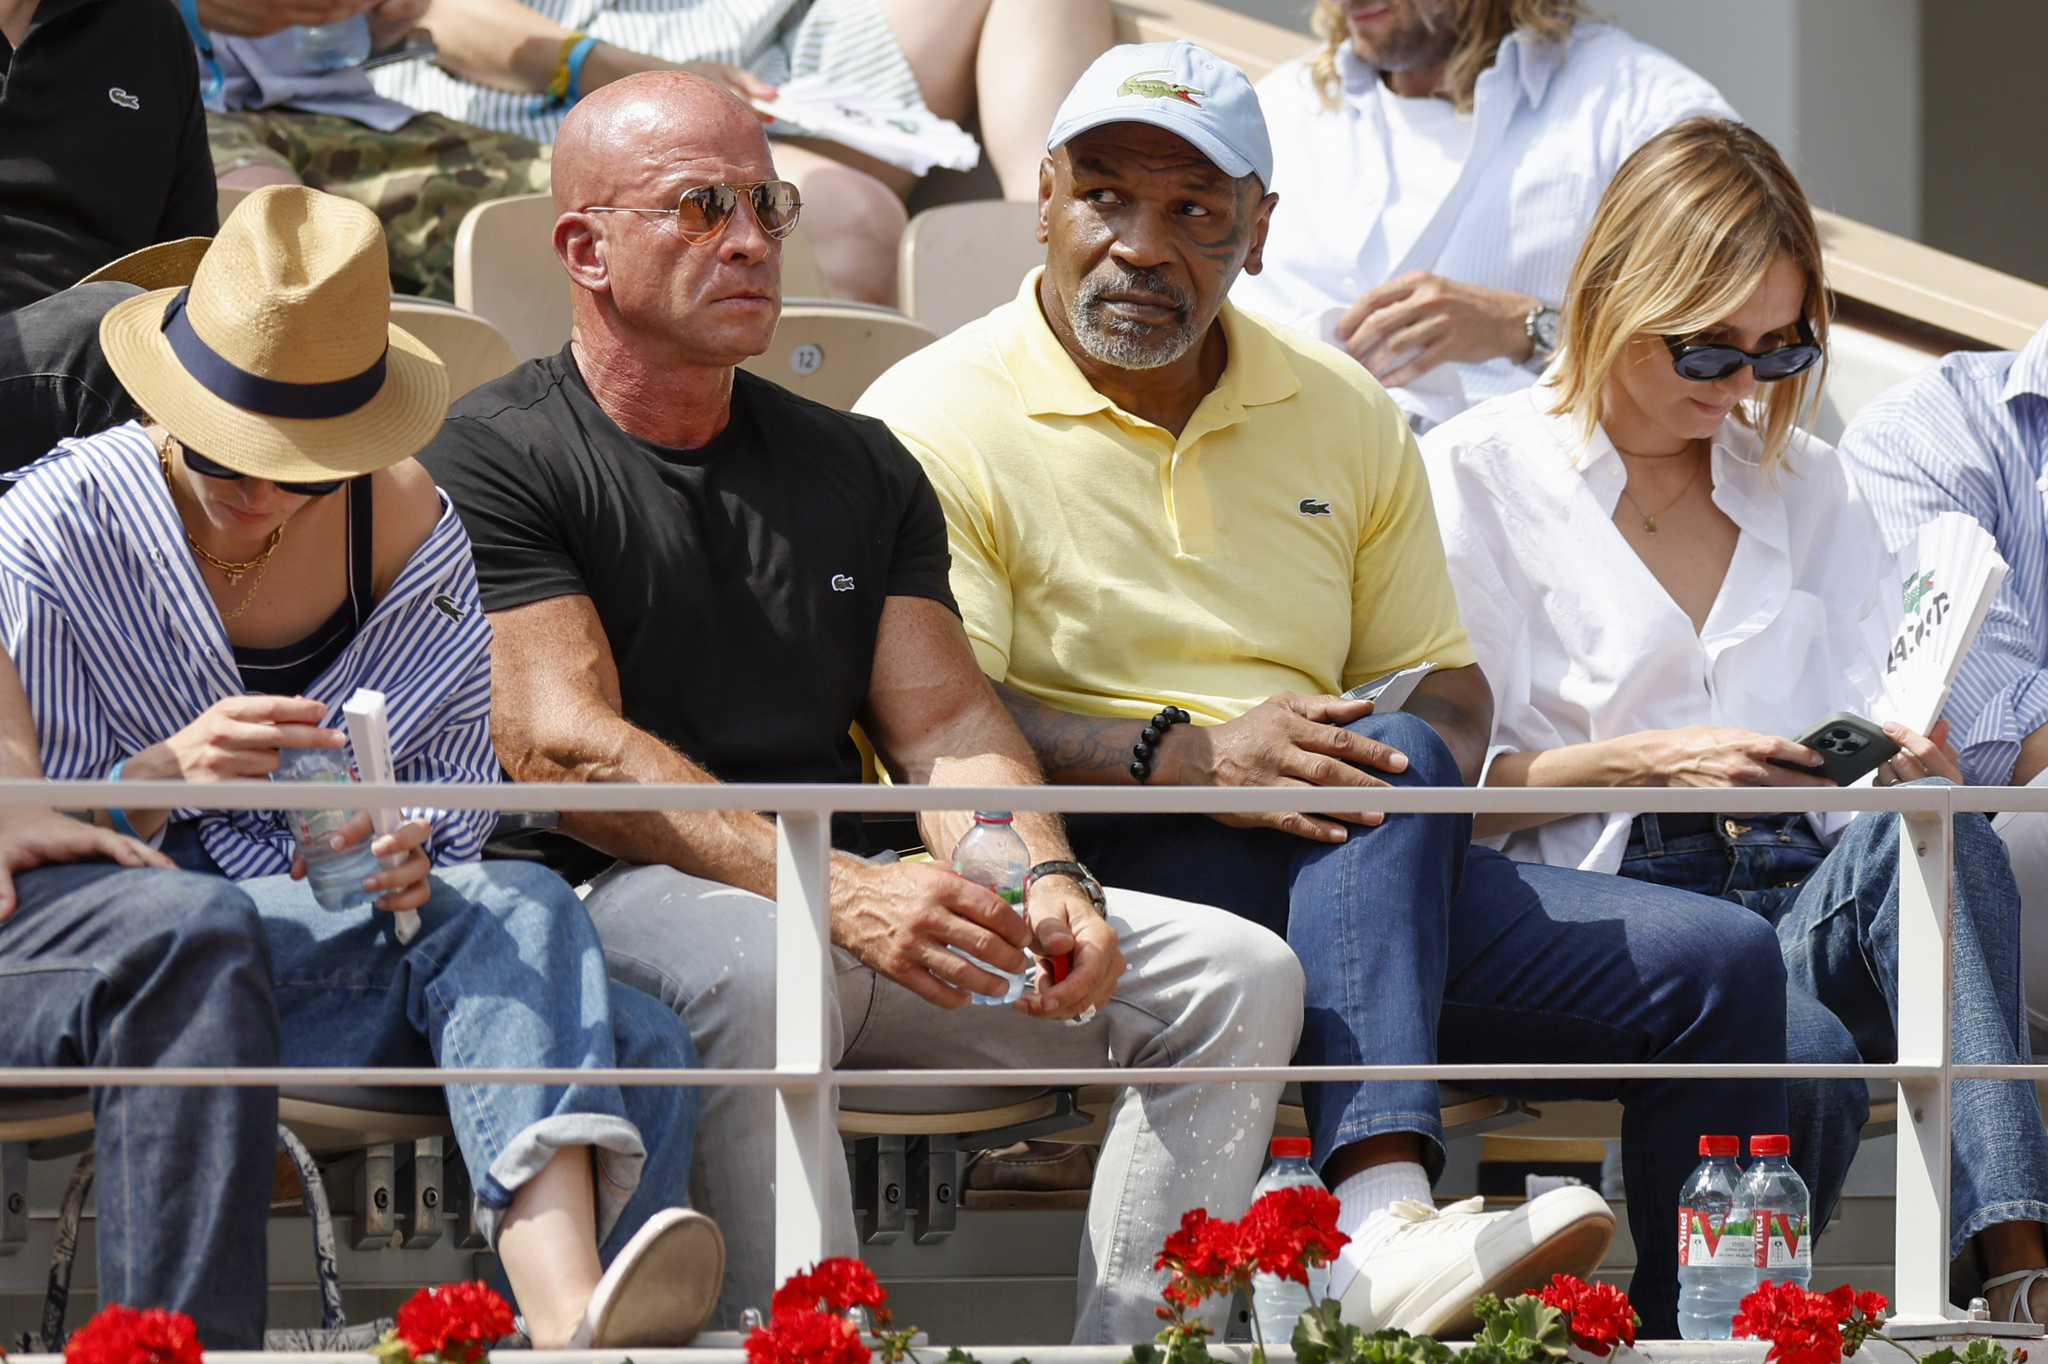 Former boxer Mike  lt;HIT gt;Tyson lt;/HIT gt;, second from right, watches the semifinal match of the French Open tennis tournament between Serbia's Novak Djokovic and Spain's Carlos Alcaraz at the Roland Garros stadium in Paris, Friday, June 9, 2023. (AP Photo/Jean-Francois Badias)during their semifinal match of the French Open tennis tournament at the Roland Garros stadium in Paris, Friday, June 9, 2023. (AP Photo/Jean-Francois Badias)